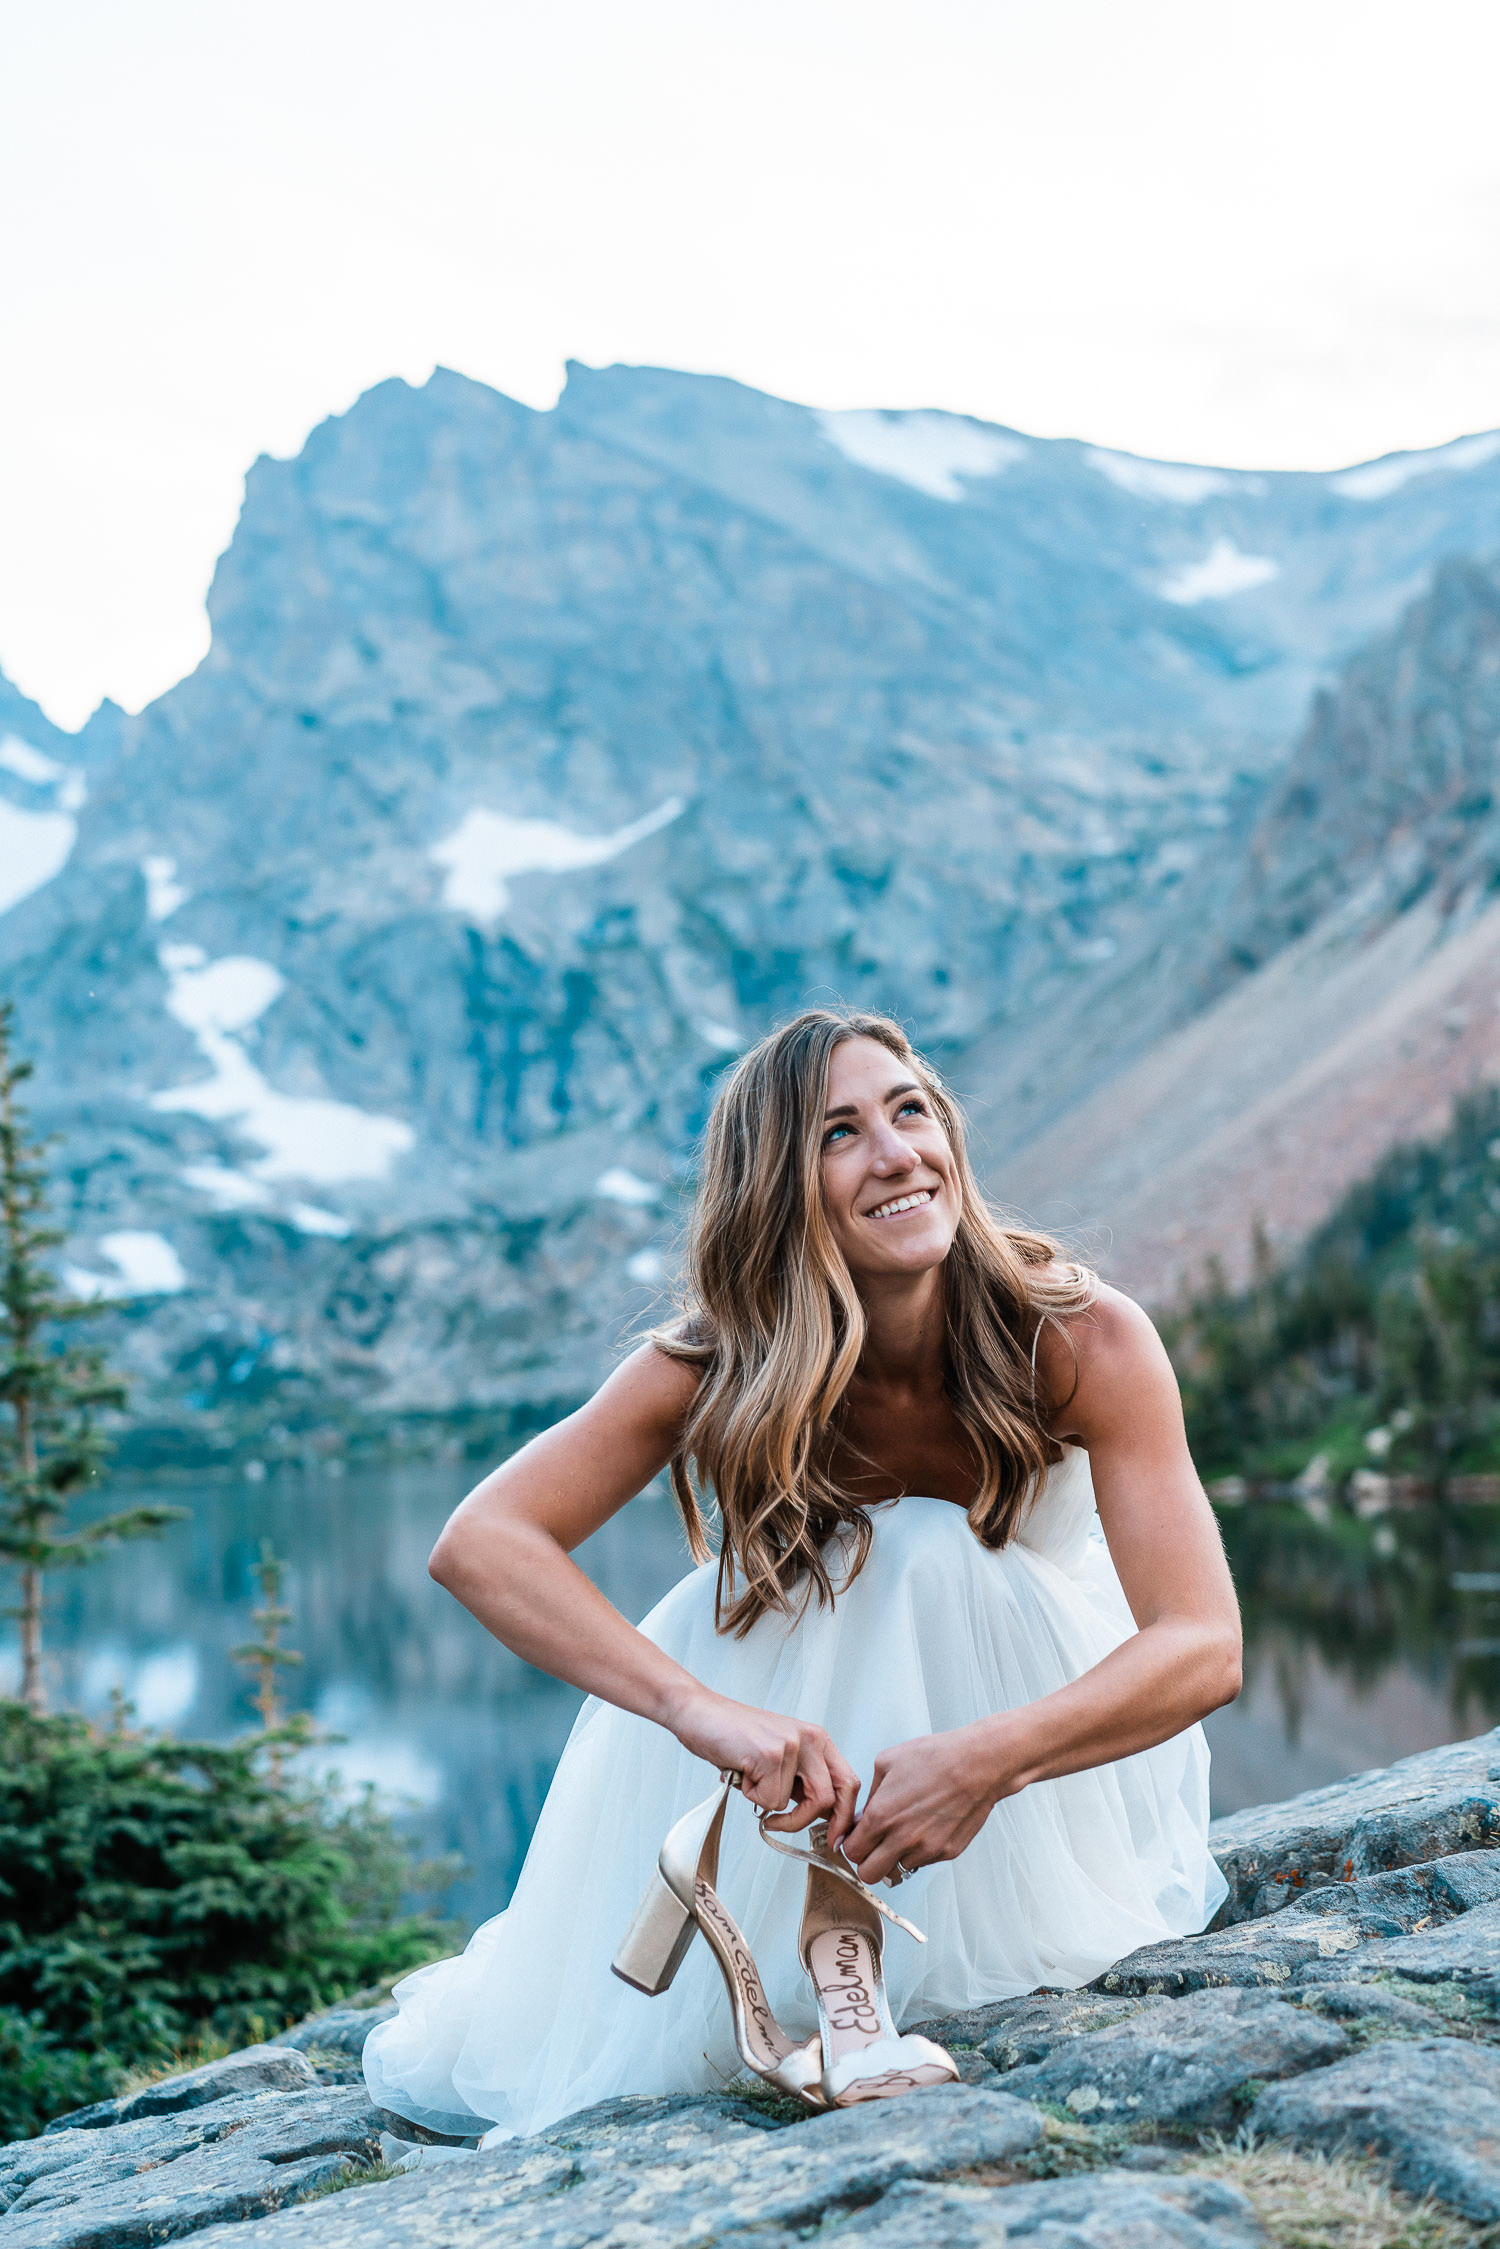 Lake Isabelle Hiking Elopement | Run Wild With Me Photography